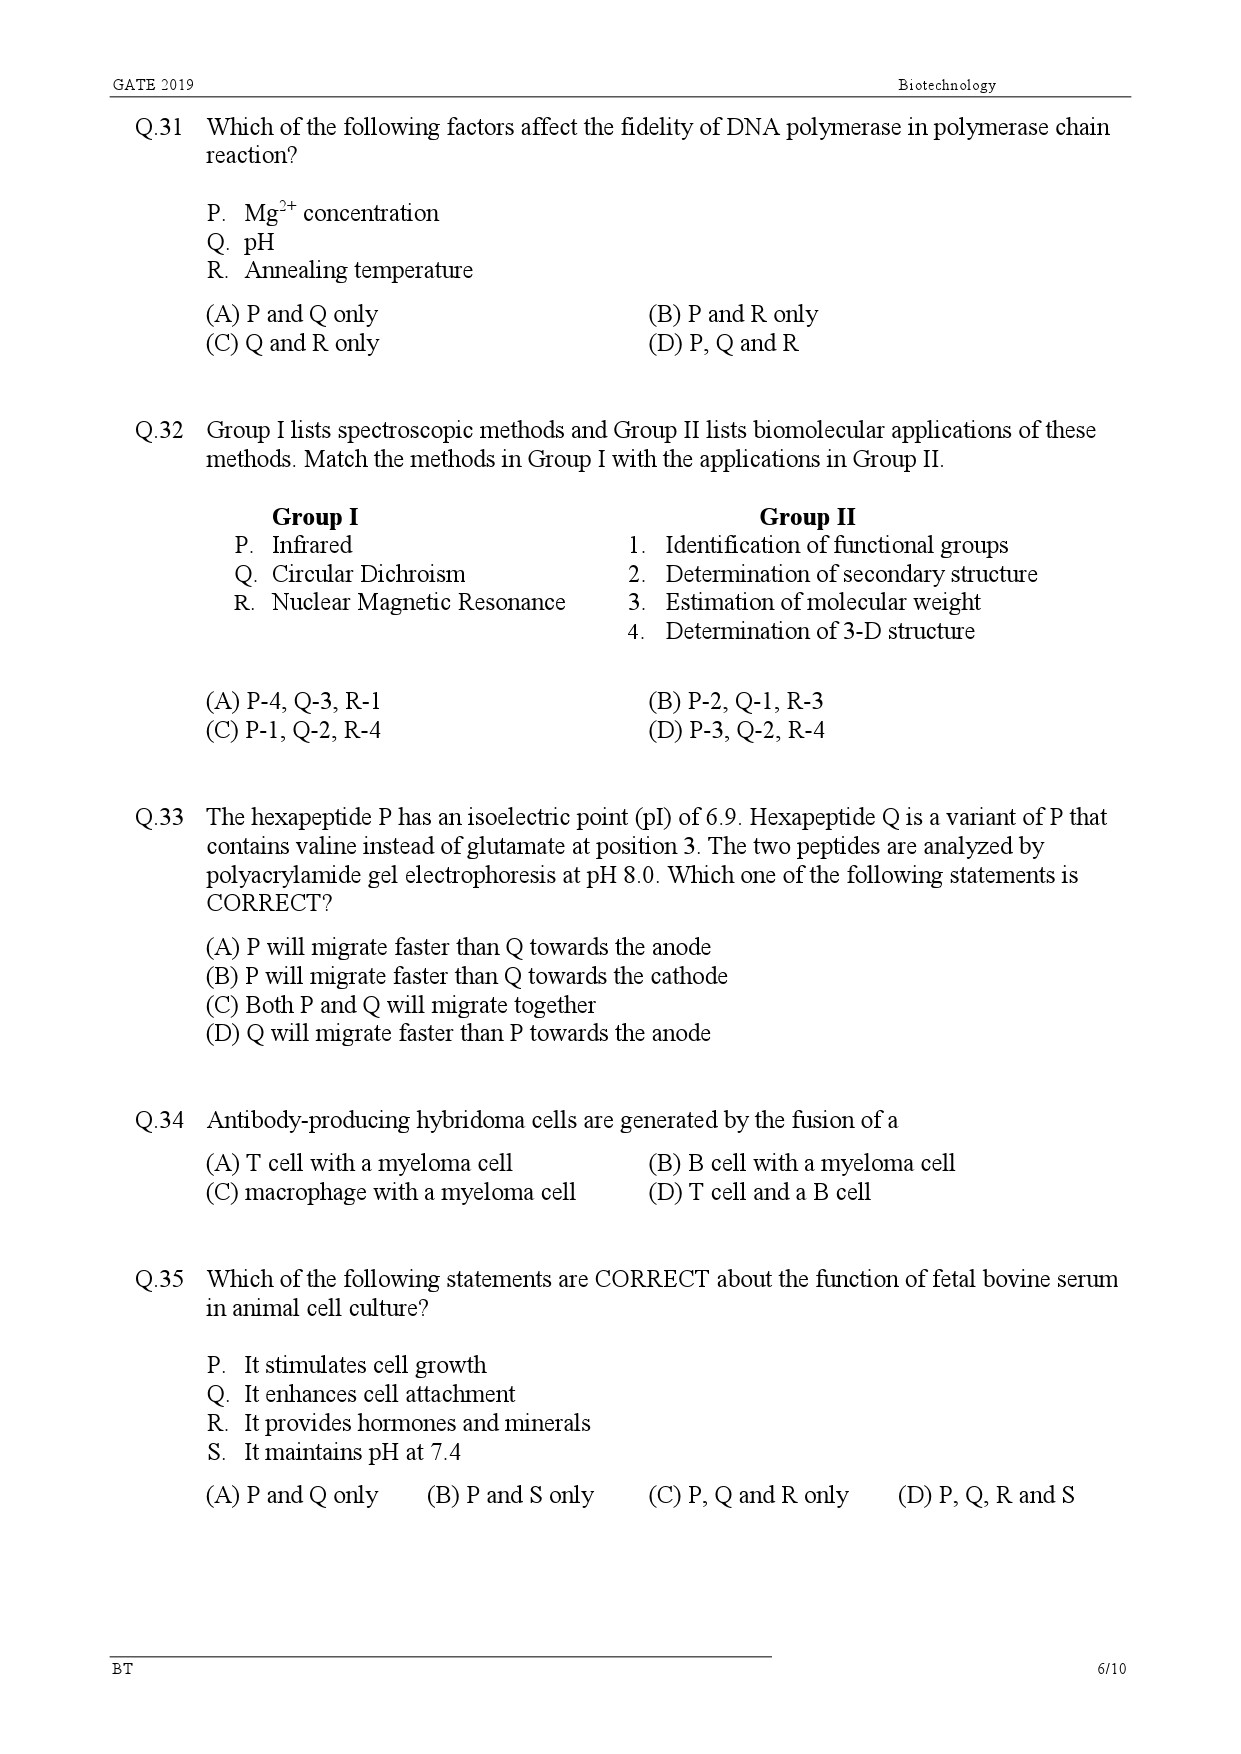 GATE Exam Question Paper 2019 Biotechnology 9